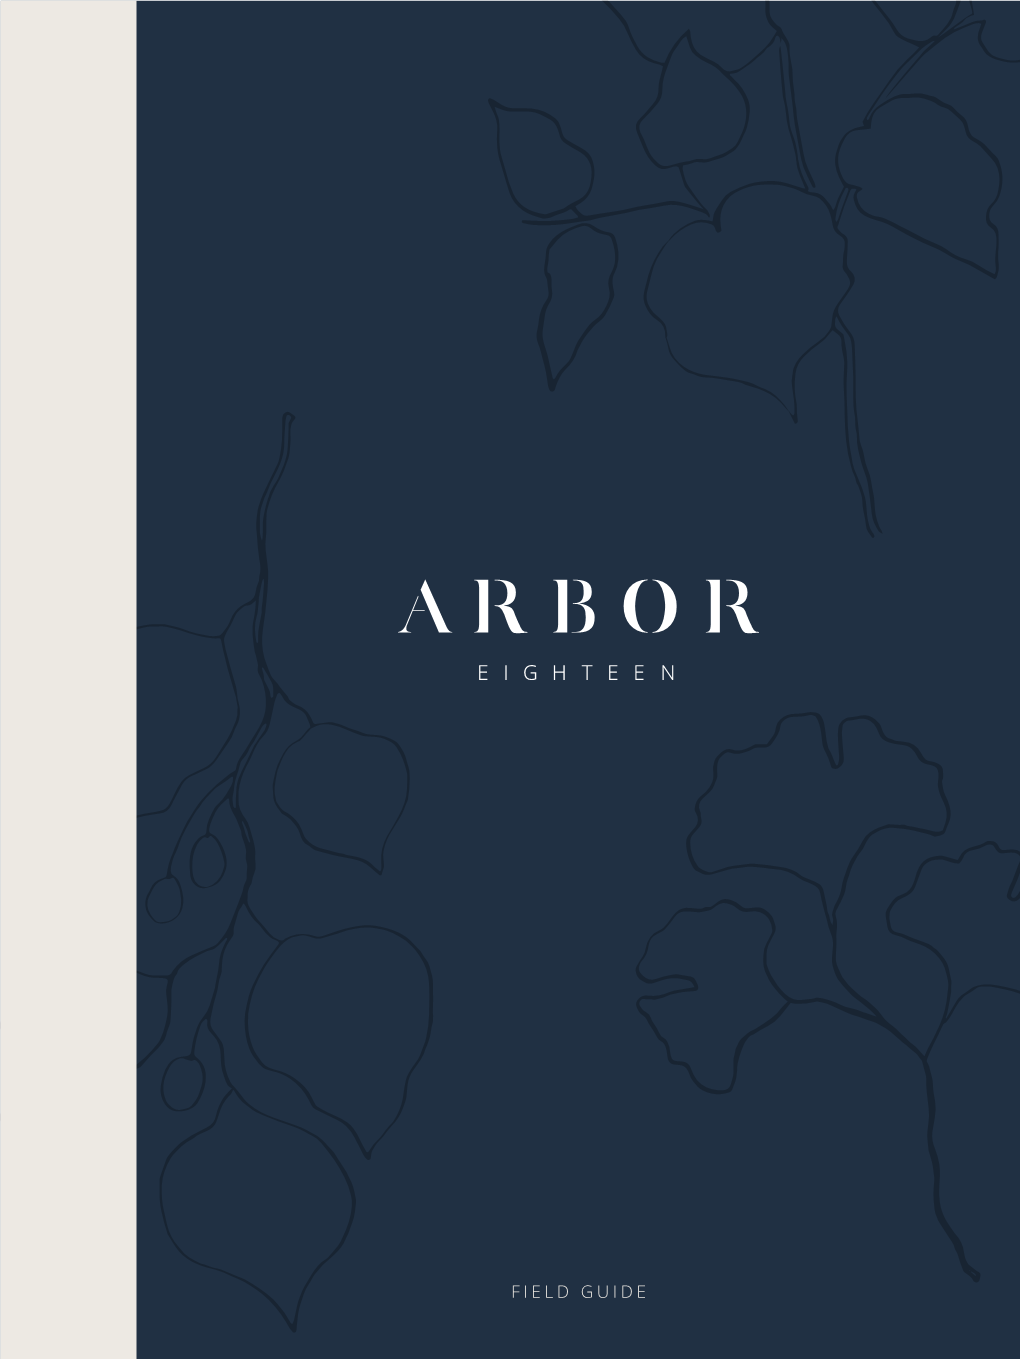 Field Guide Welcome to Arbor Eighteen —